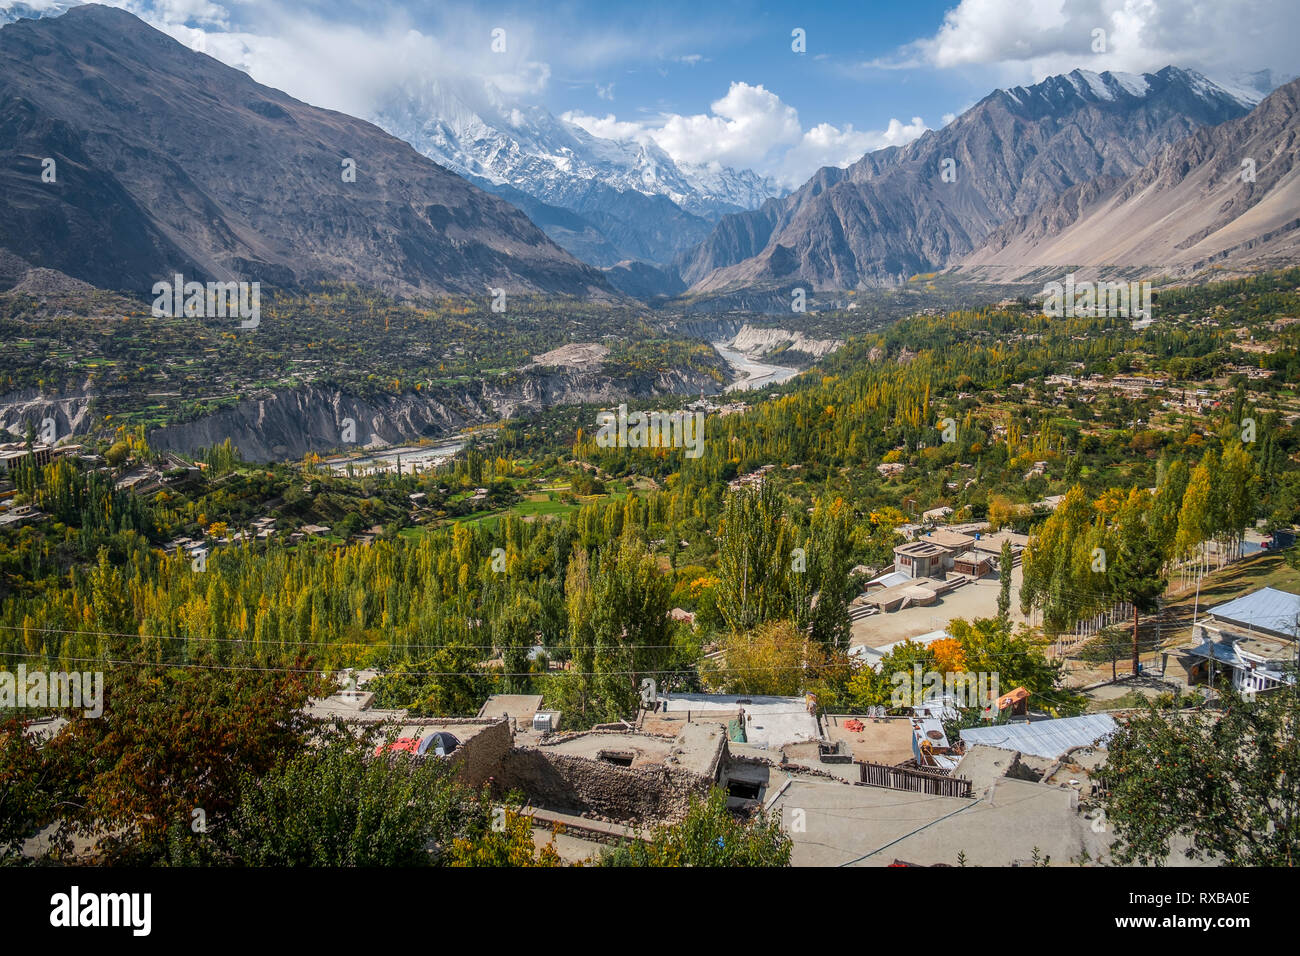 Landscape Of Peaceful Hunza Nagar Valley In Autumn With A